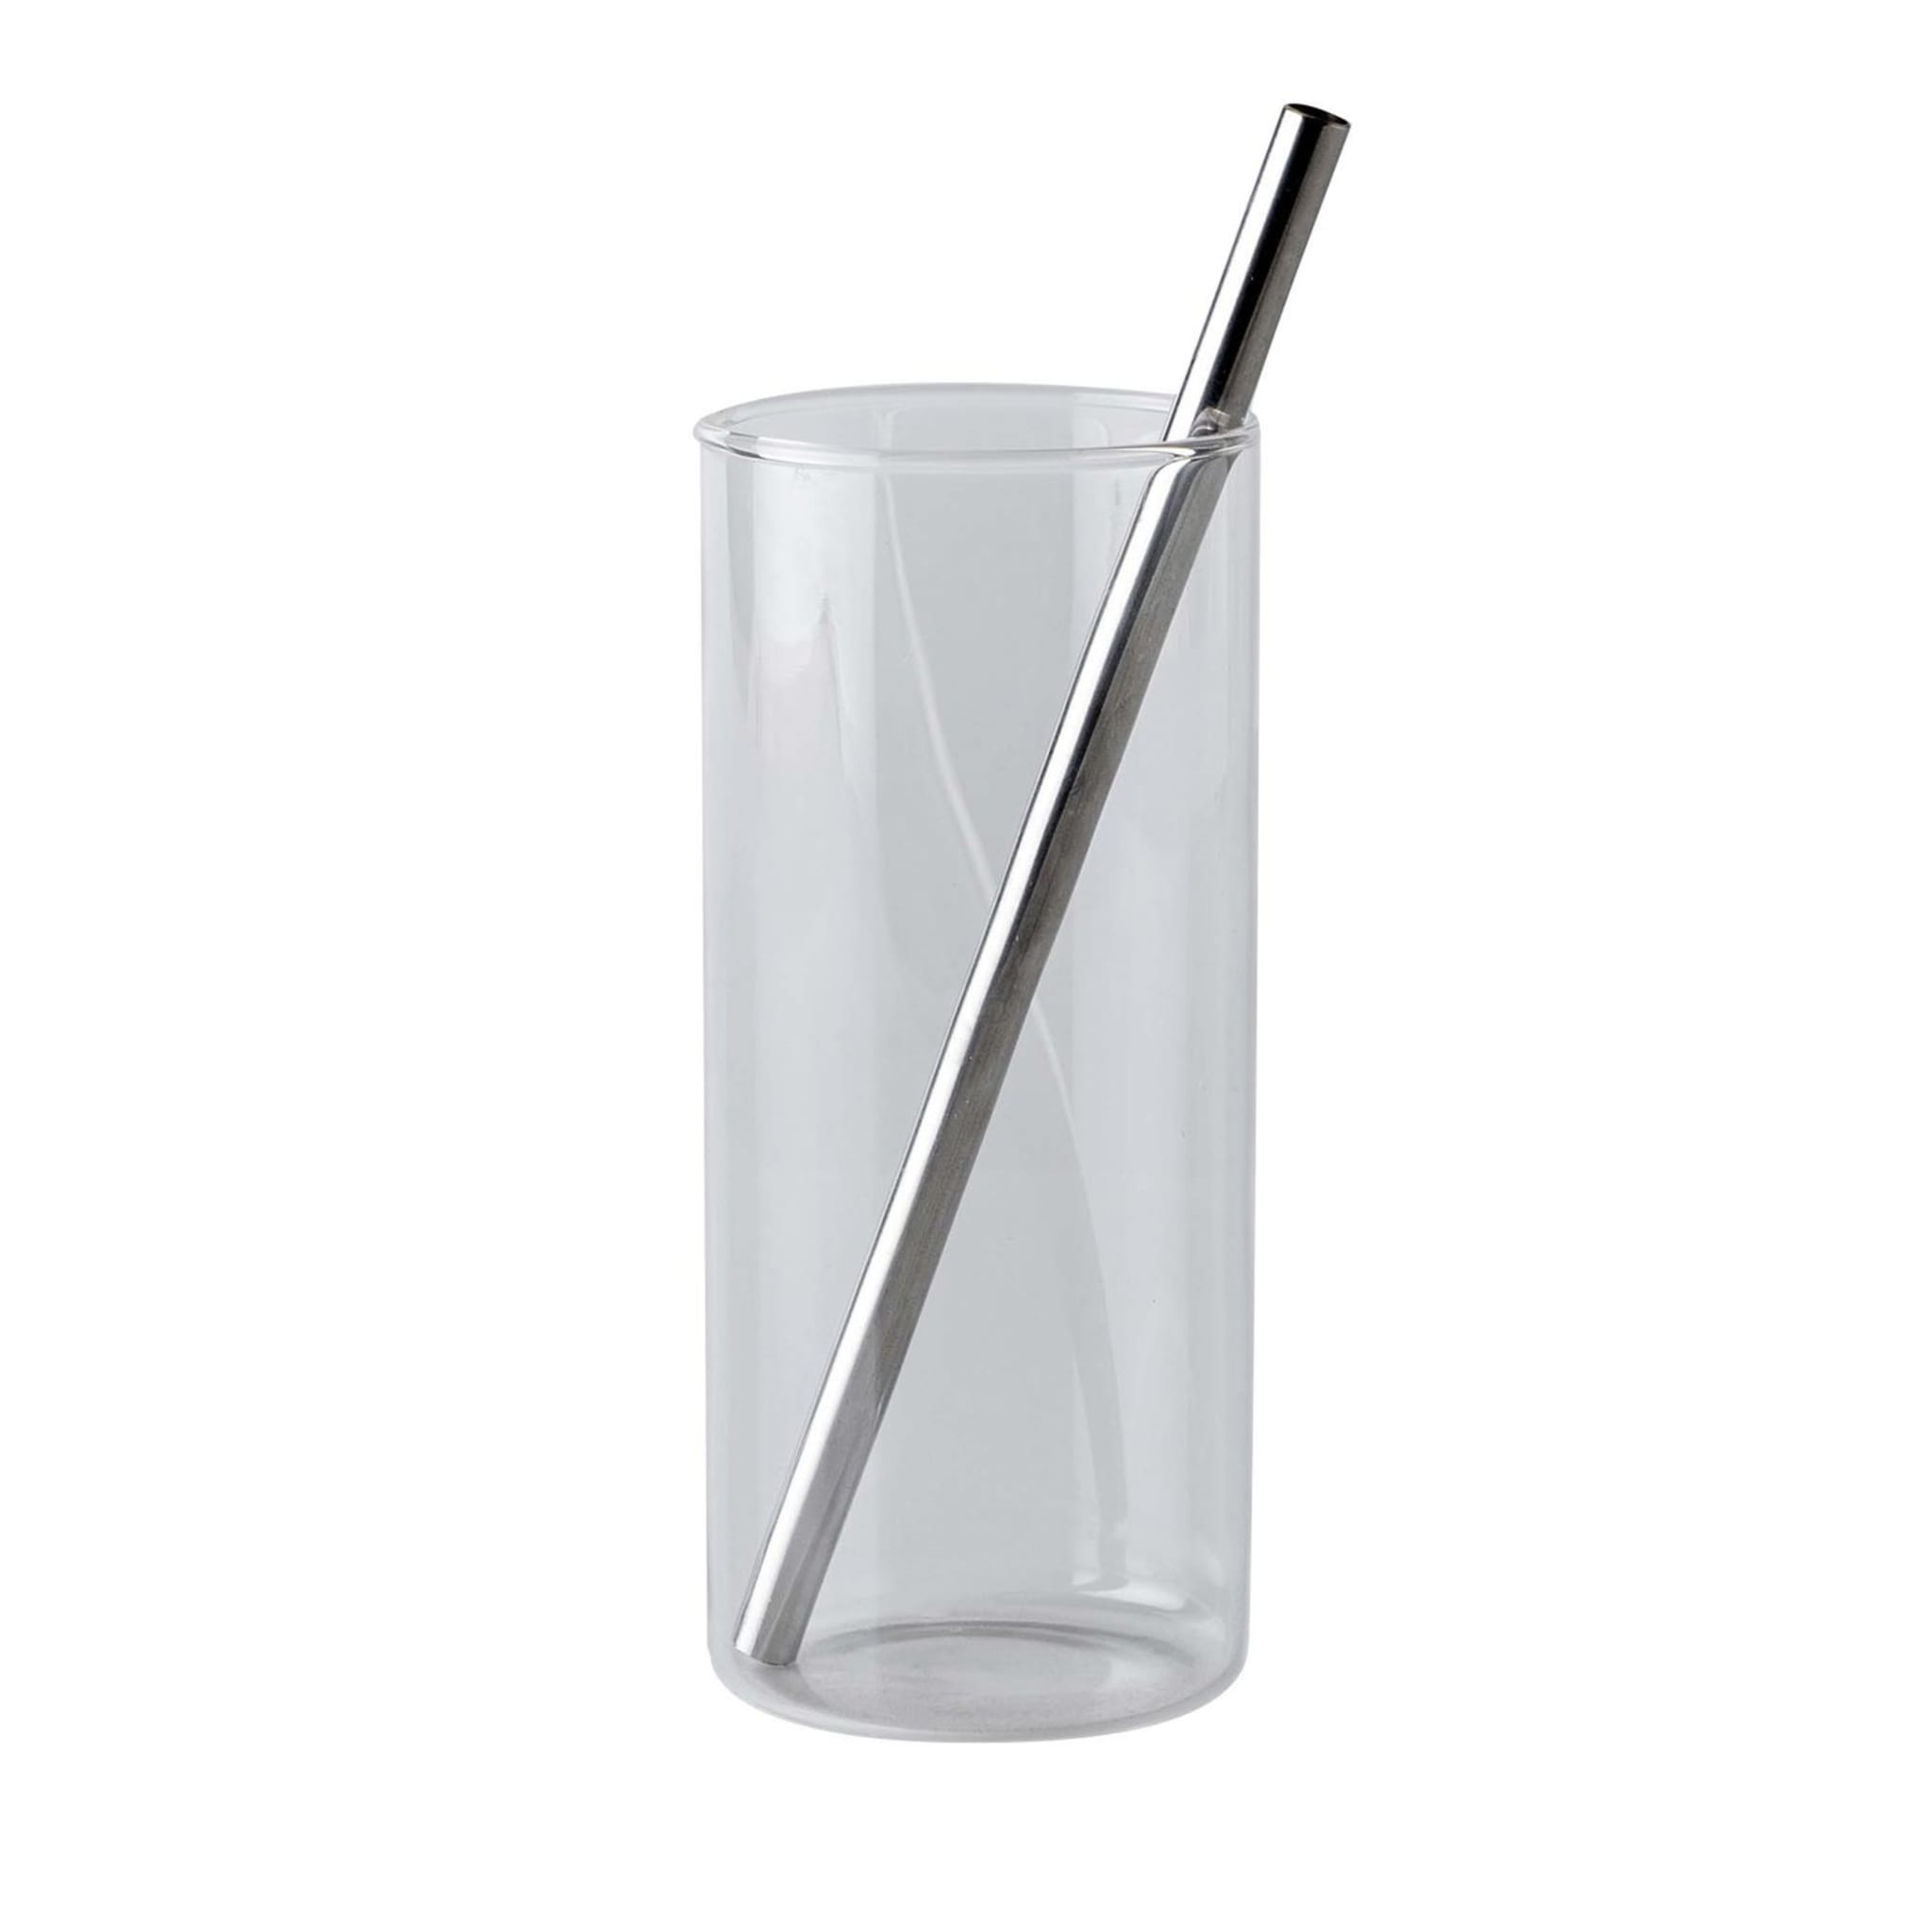 6 Clear Glass Straw Set of 6